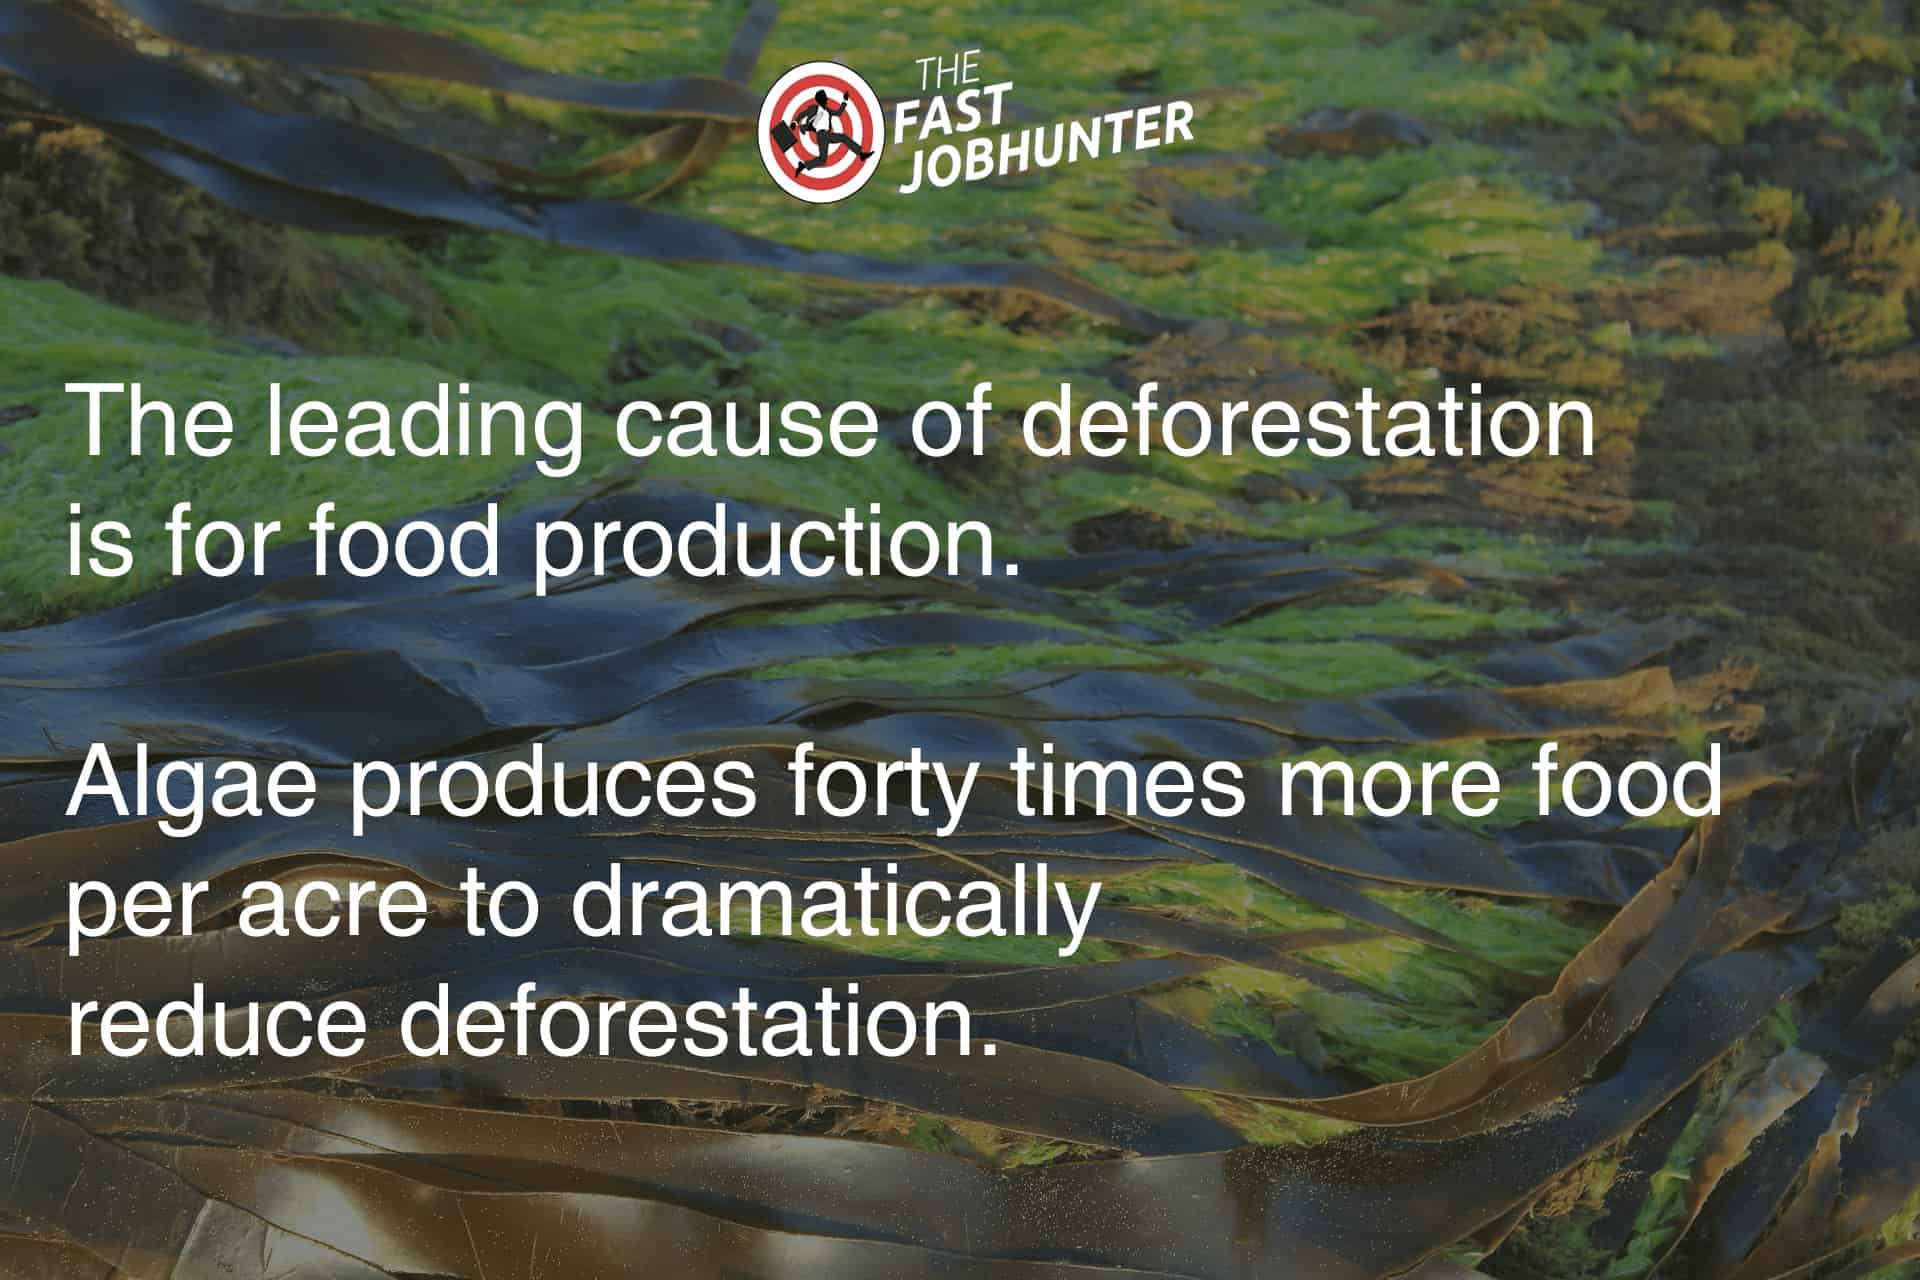 The Leading Cause of Deforastation is Food Production